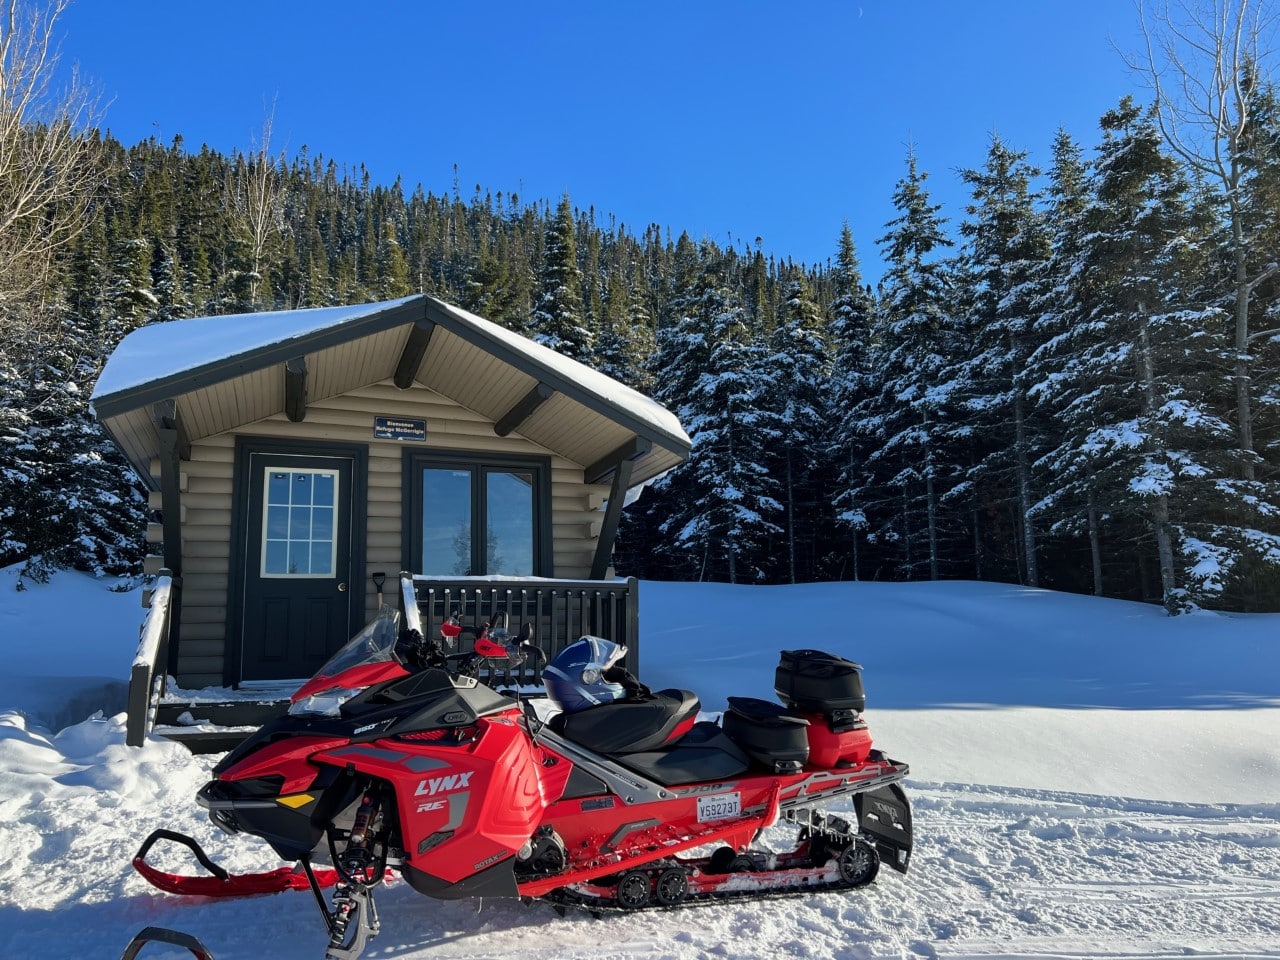 The shelters are very useful to snowmobilers who need to warm up